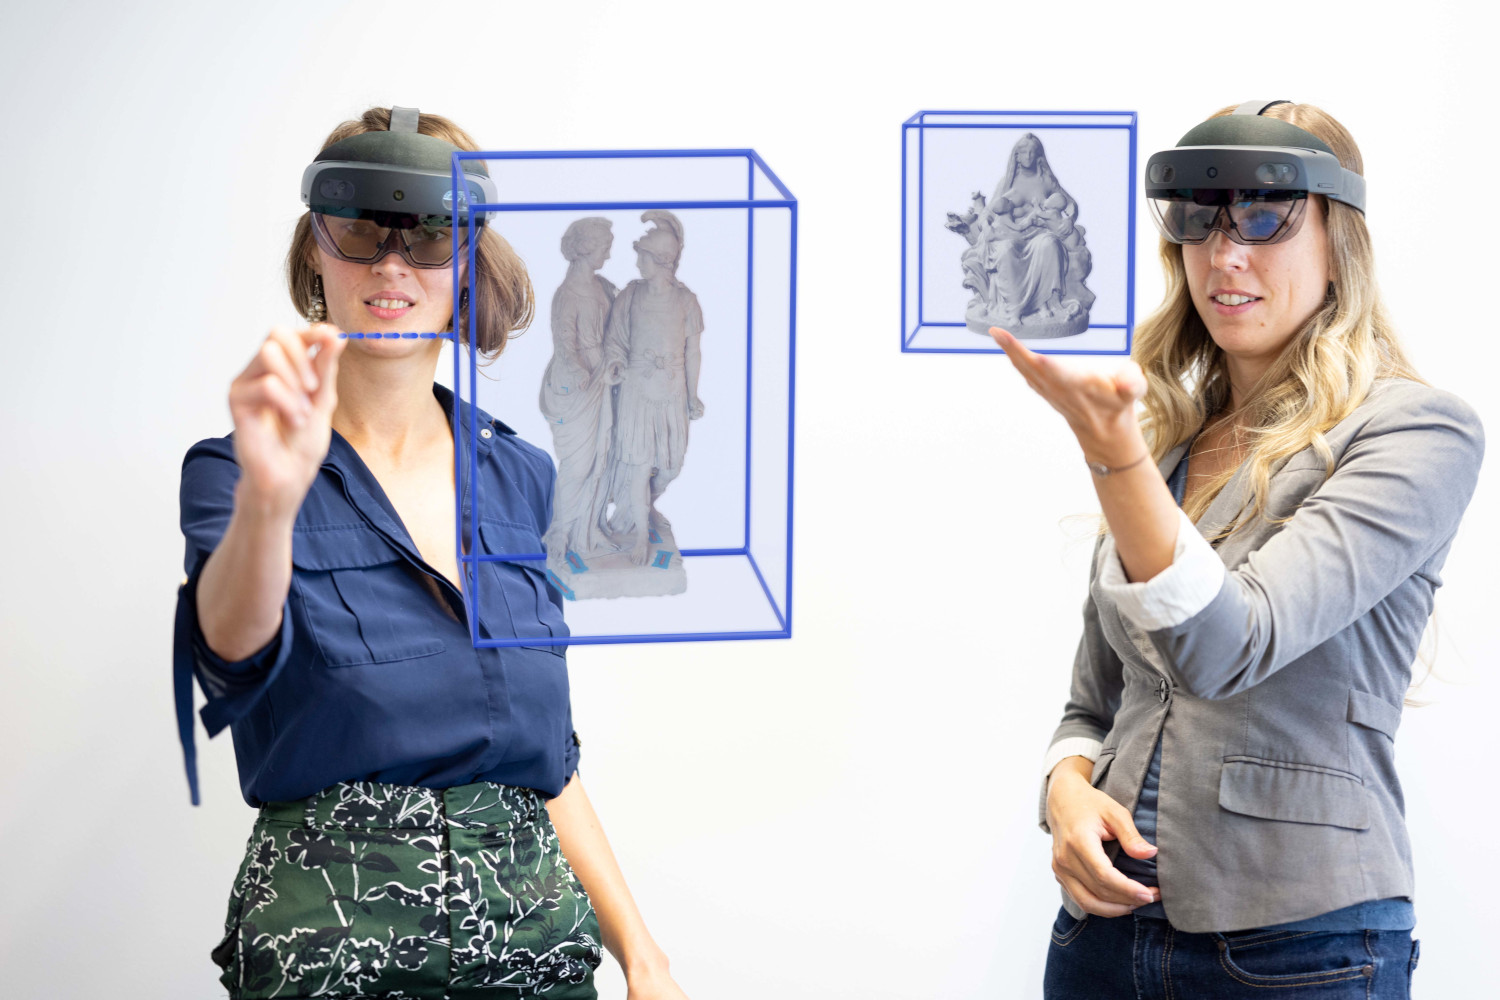 Two women wearing Hololens glasses can be seen, as well as visualizations of what they see in extended reality.